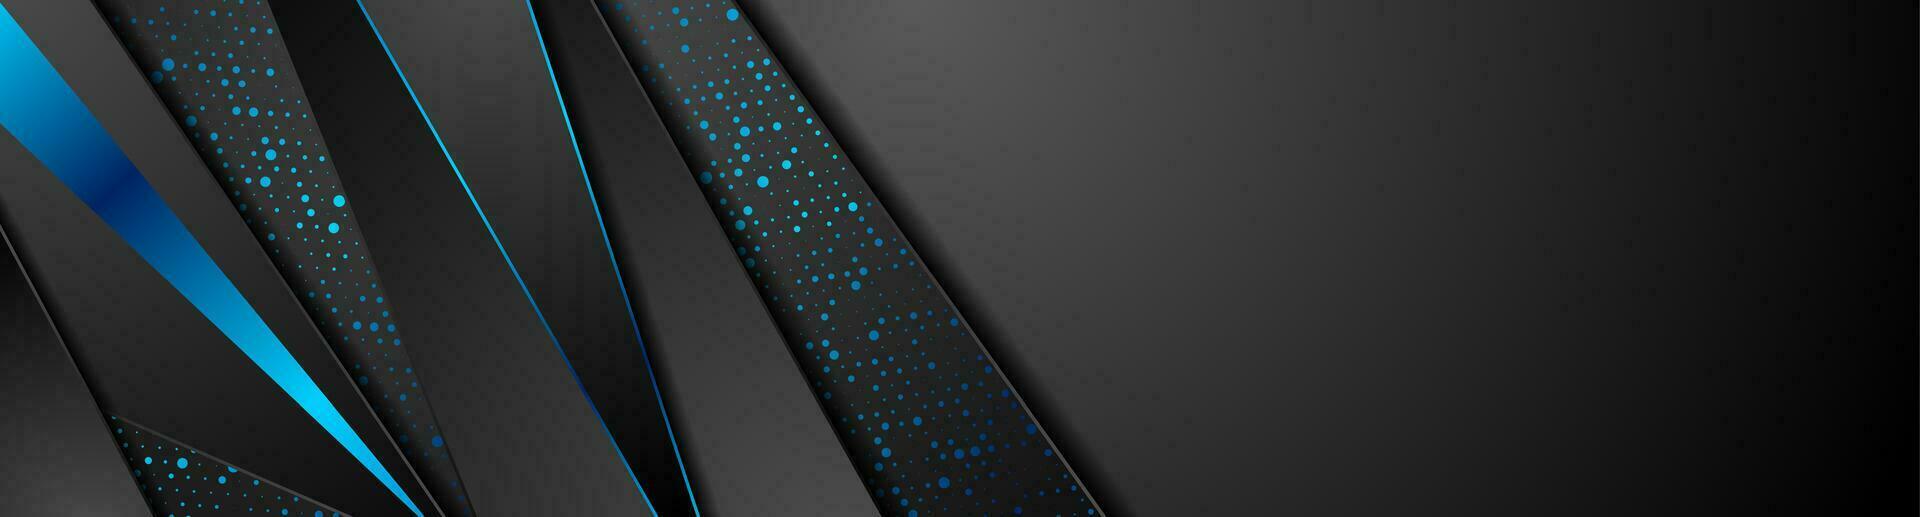 Black technology abstract banner with blue dots vector